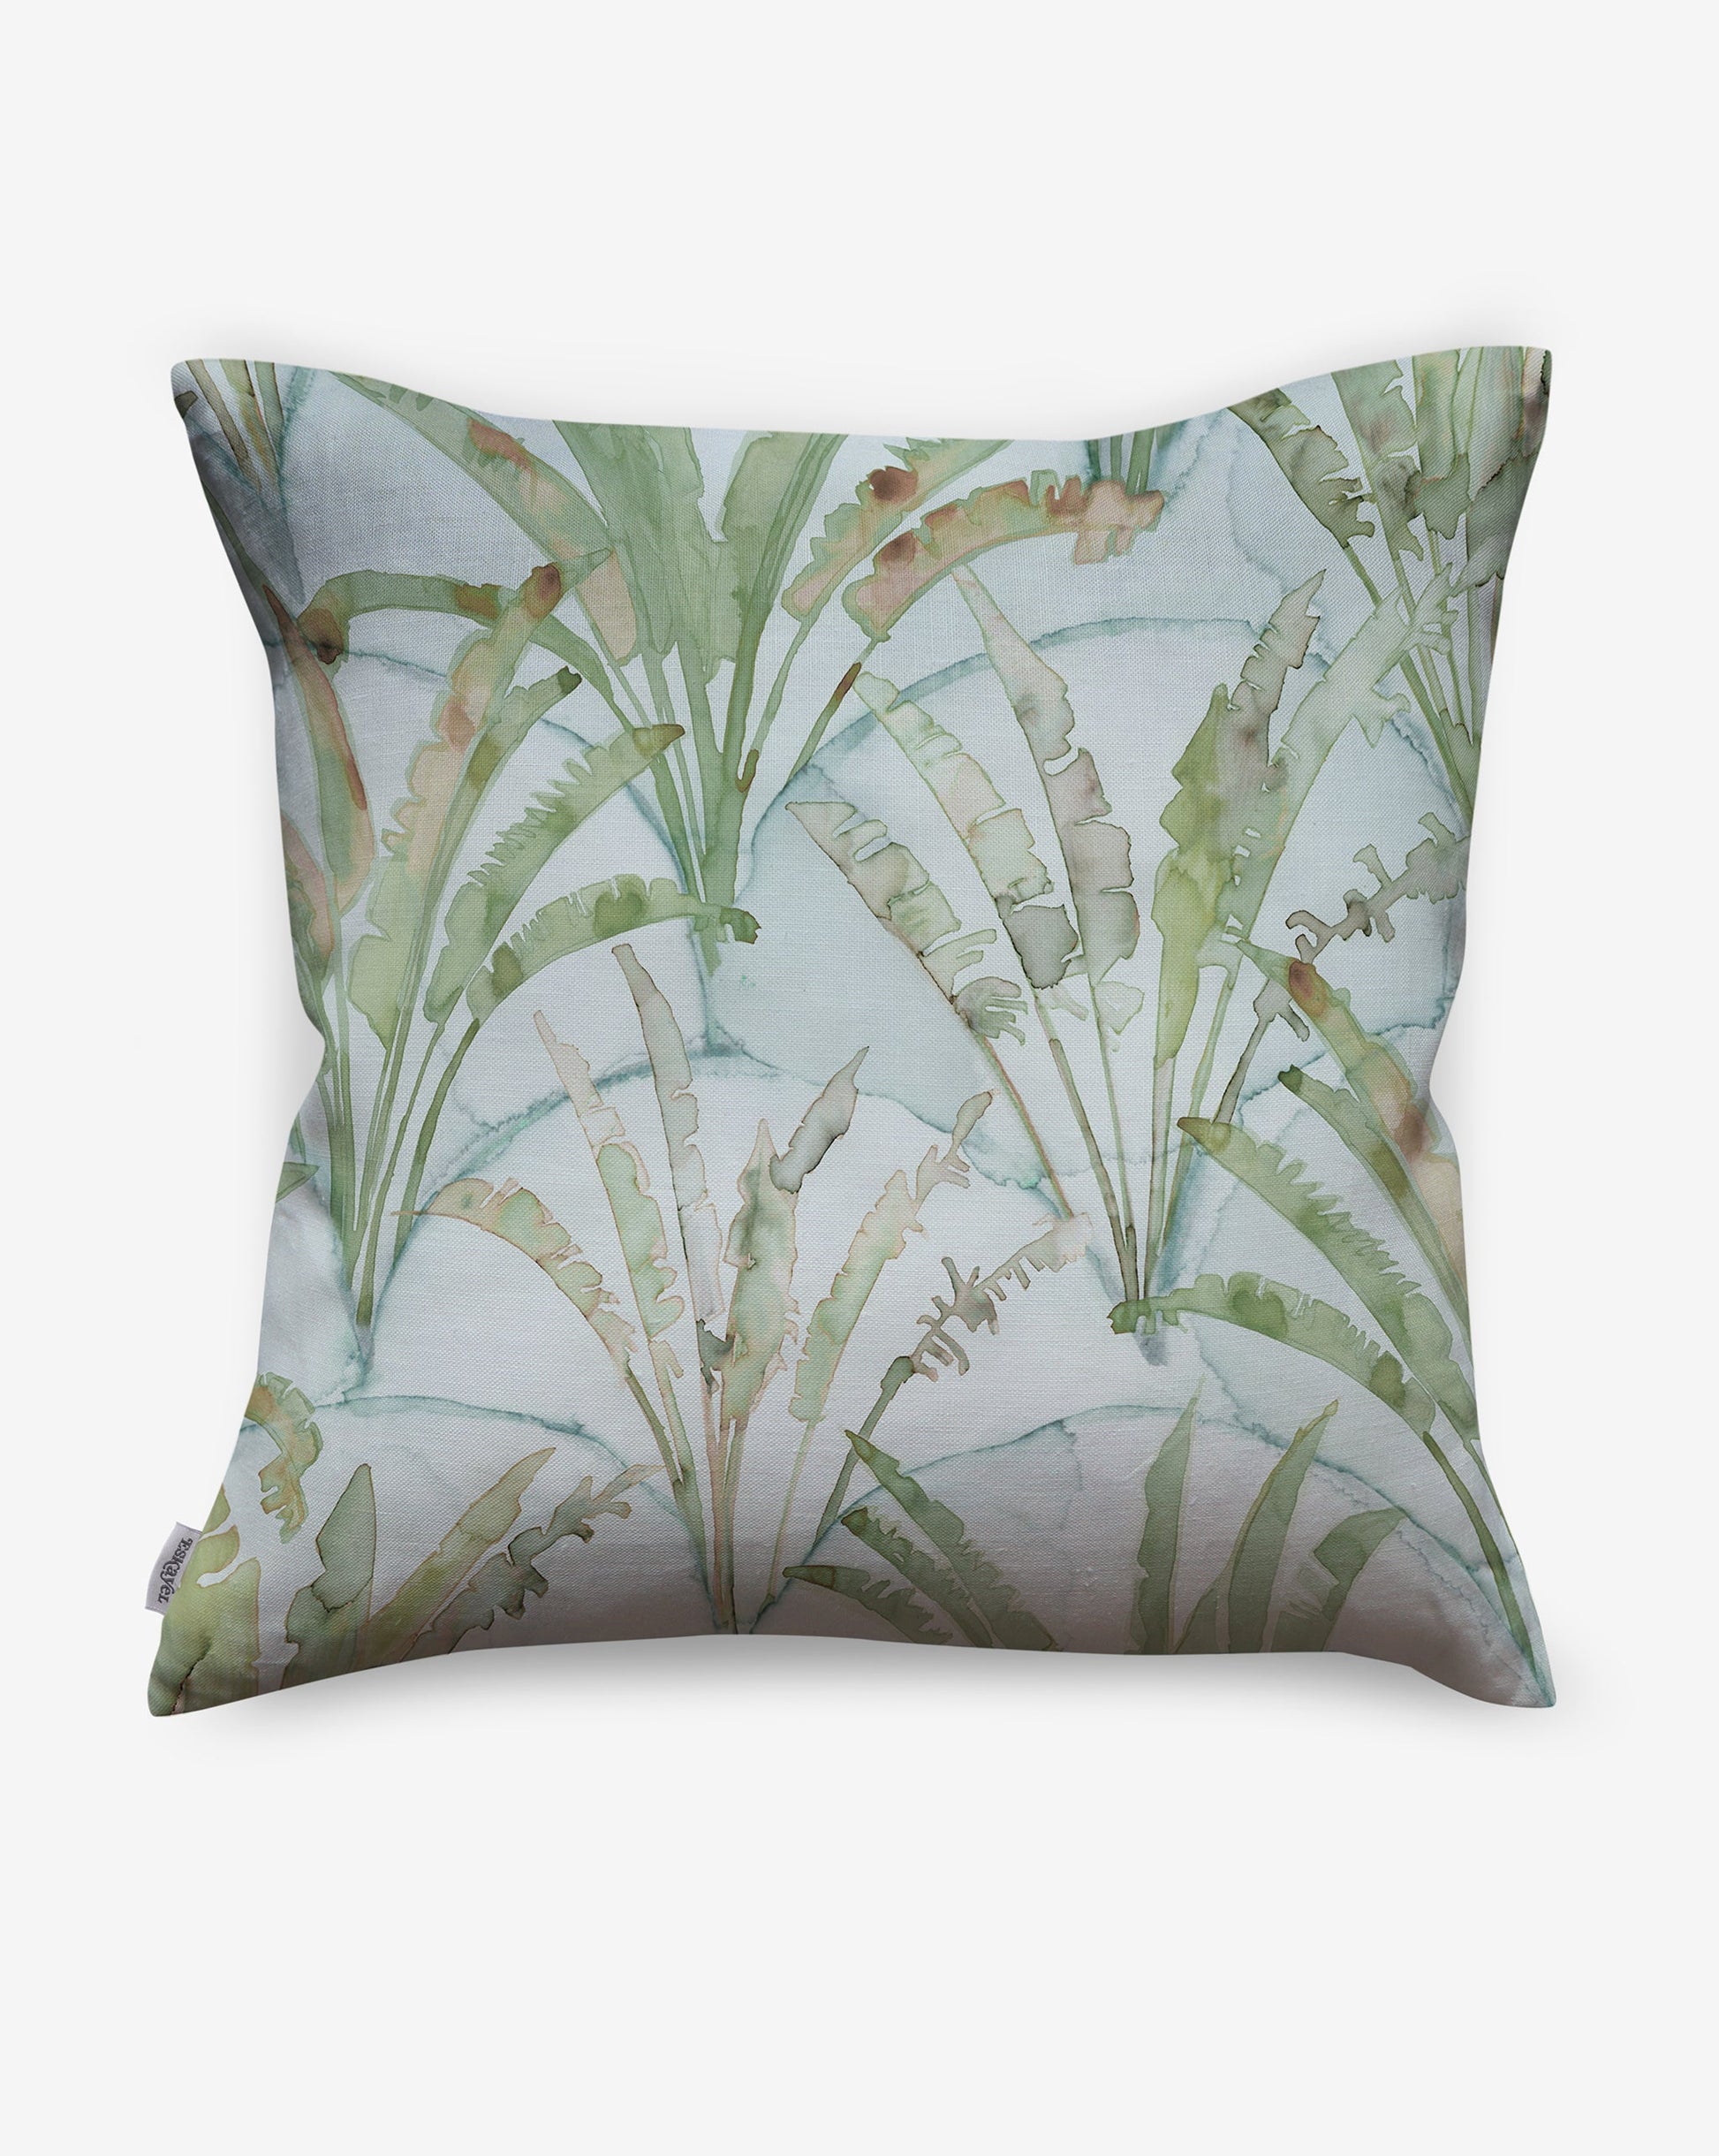 Featuring palms on a geometric scallop backdrop, Travelers Palm pillows in Sage incorporate shades of green and blue